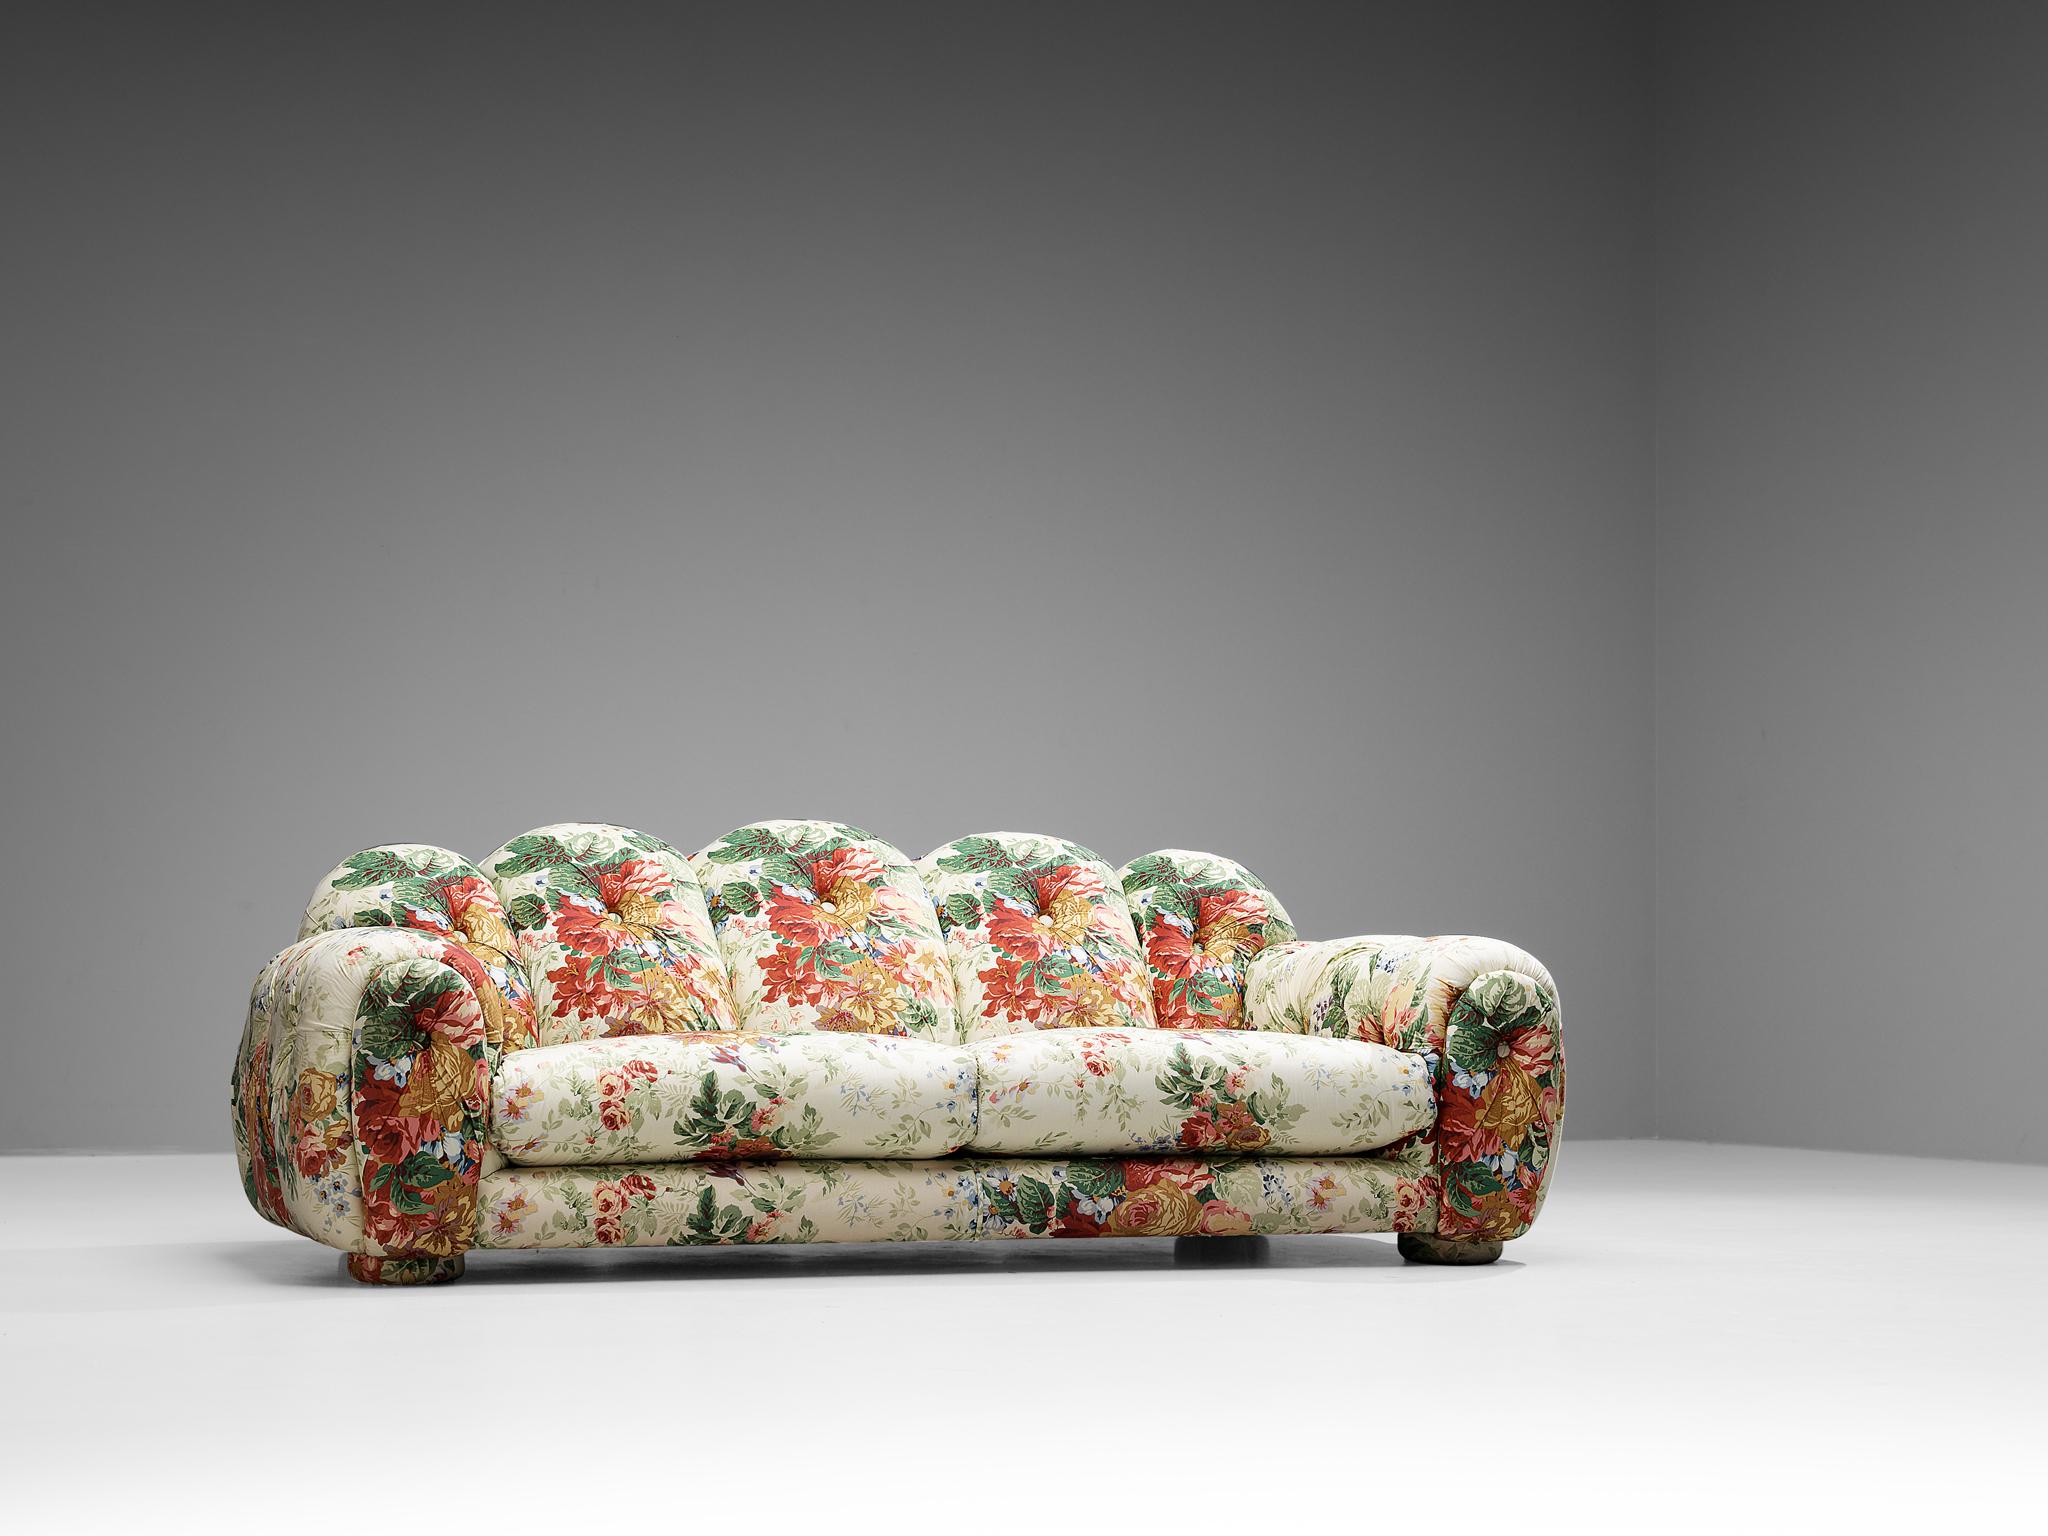 Post-Modern Vivai Del Sud 'Superstar' Sofa in Floral Upholstery